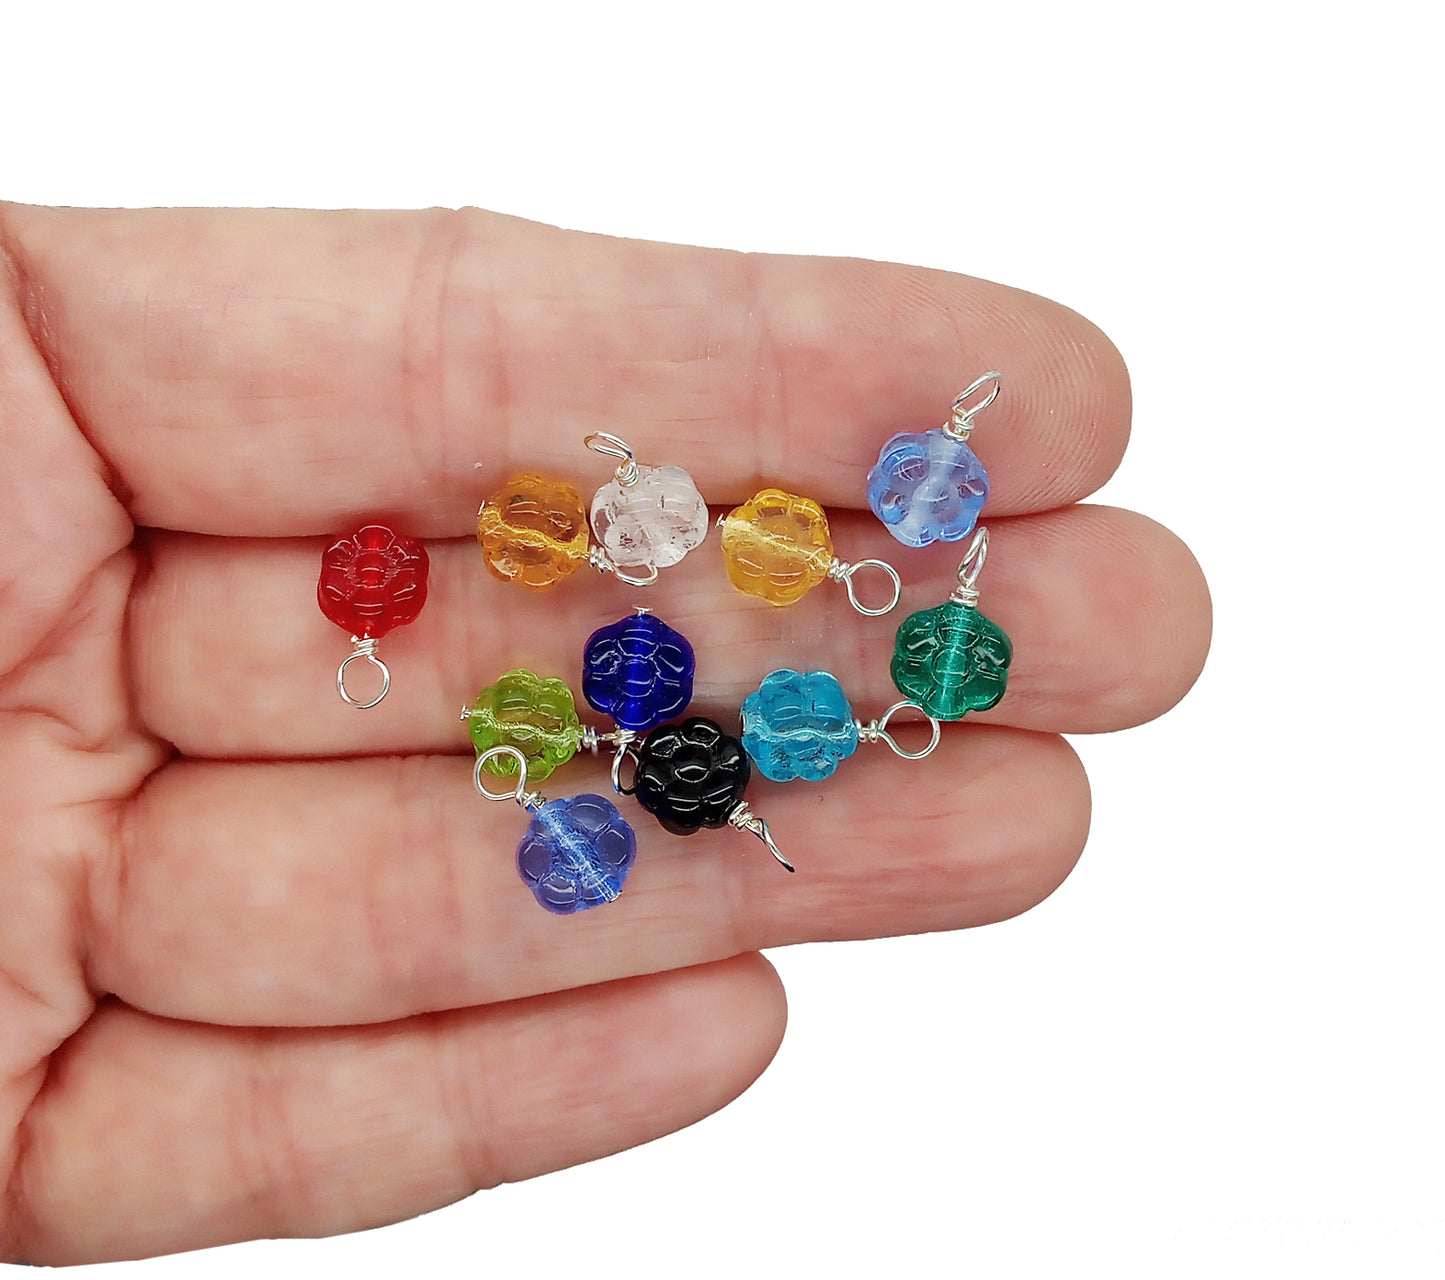 Tiny Flower Bead Dangles, 10 pc sets of Pressed Glass Colorful Charms